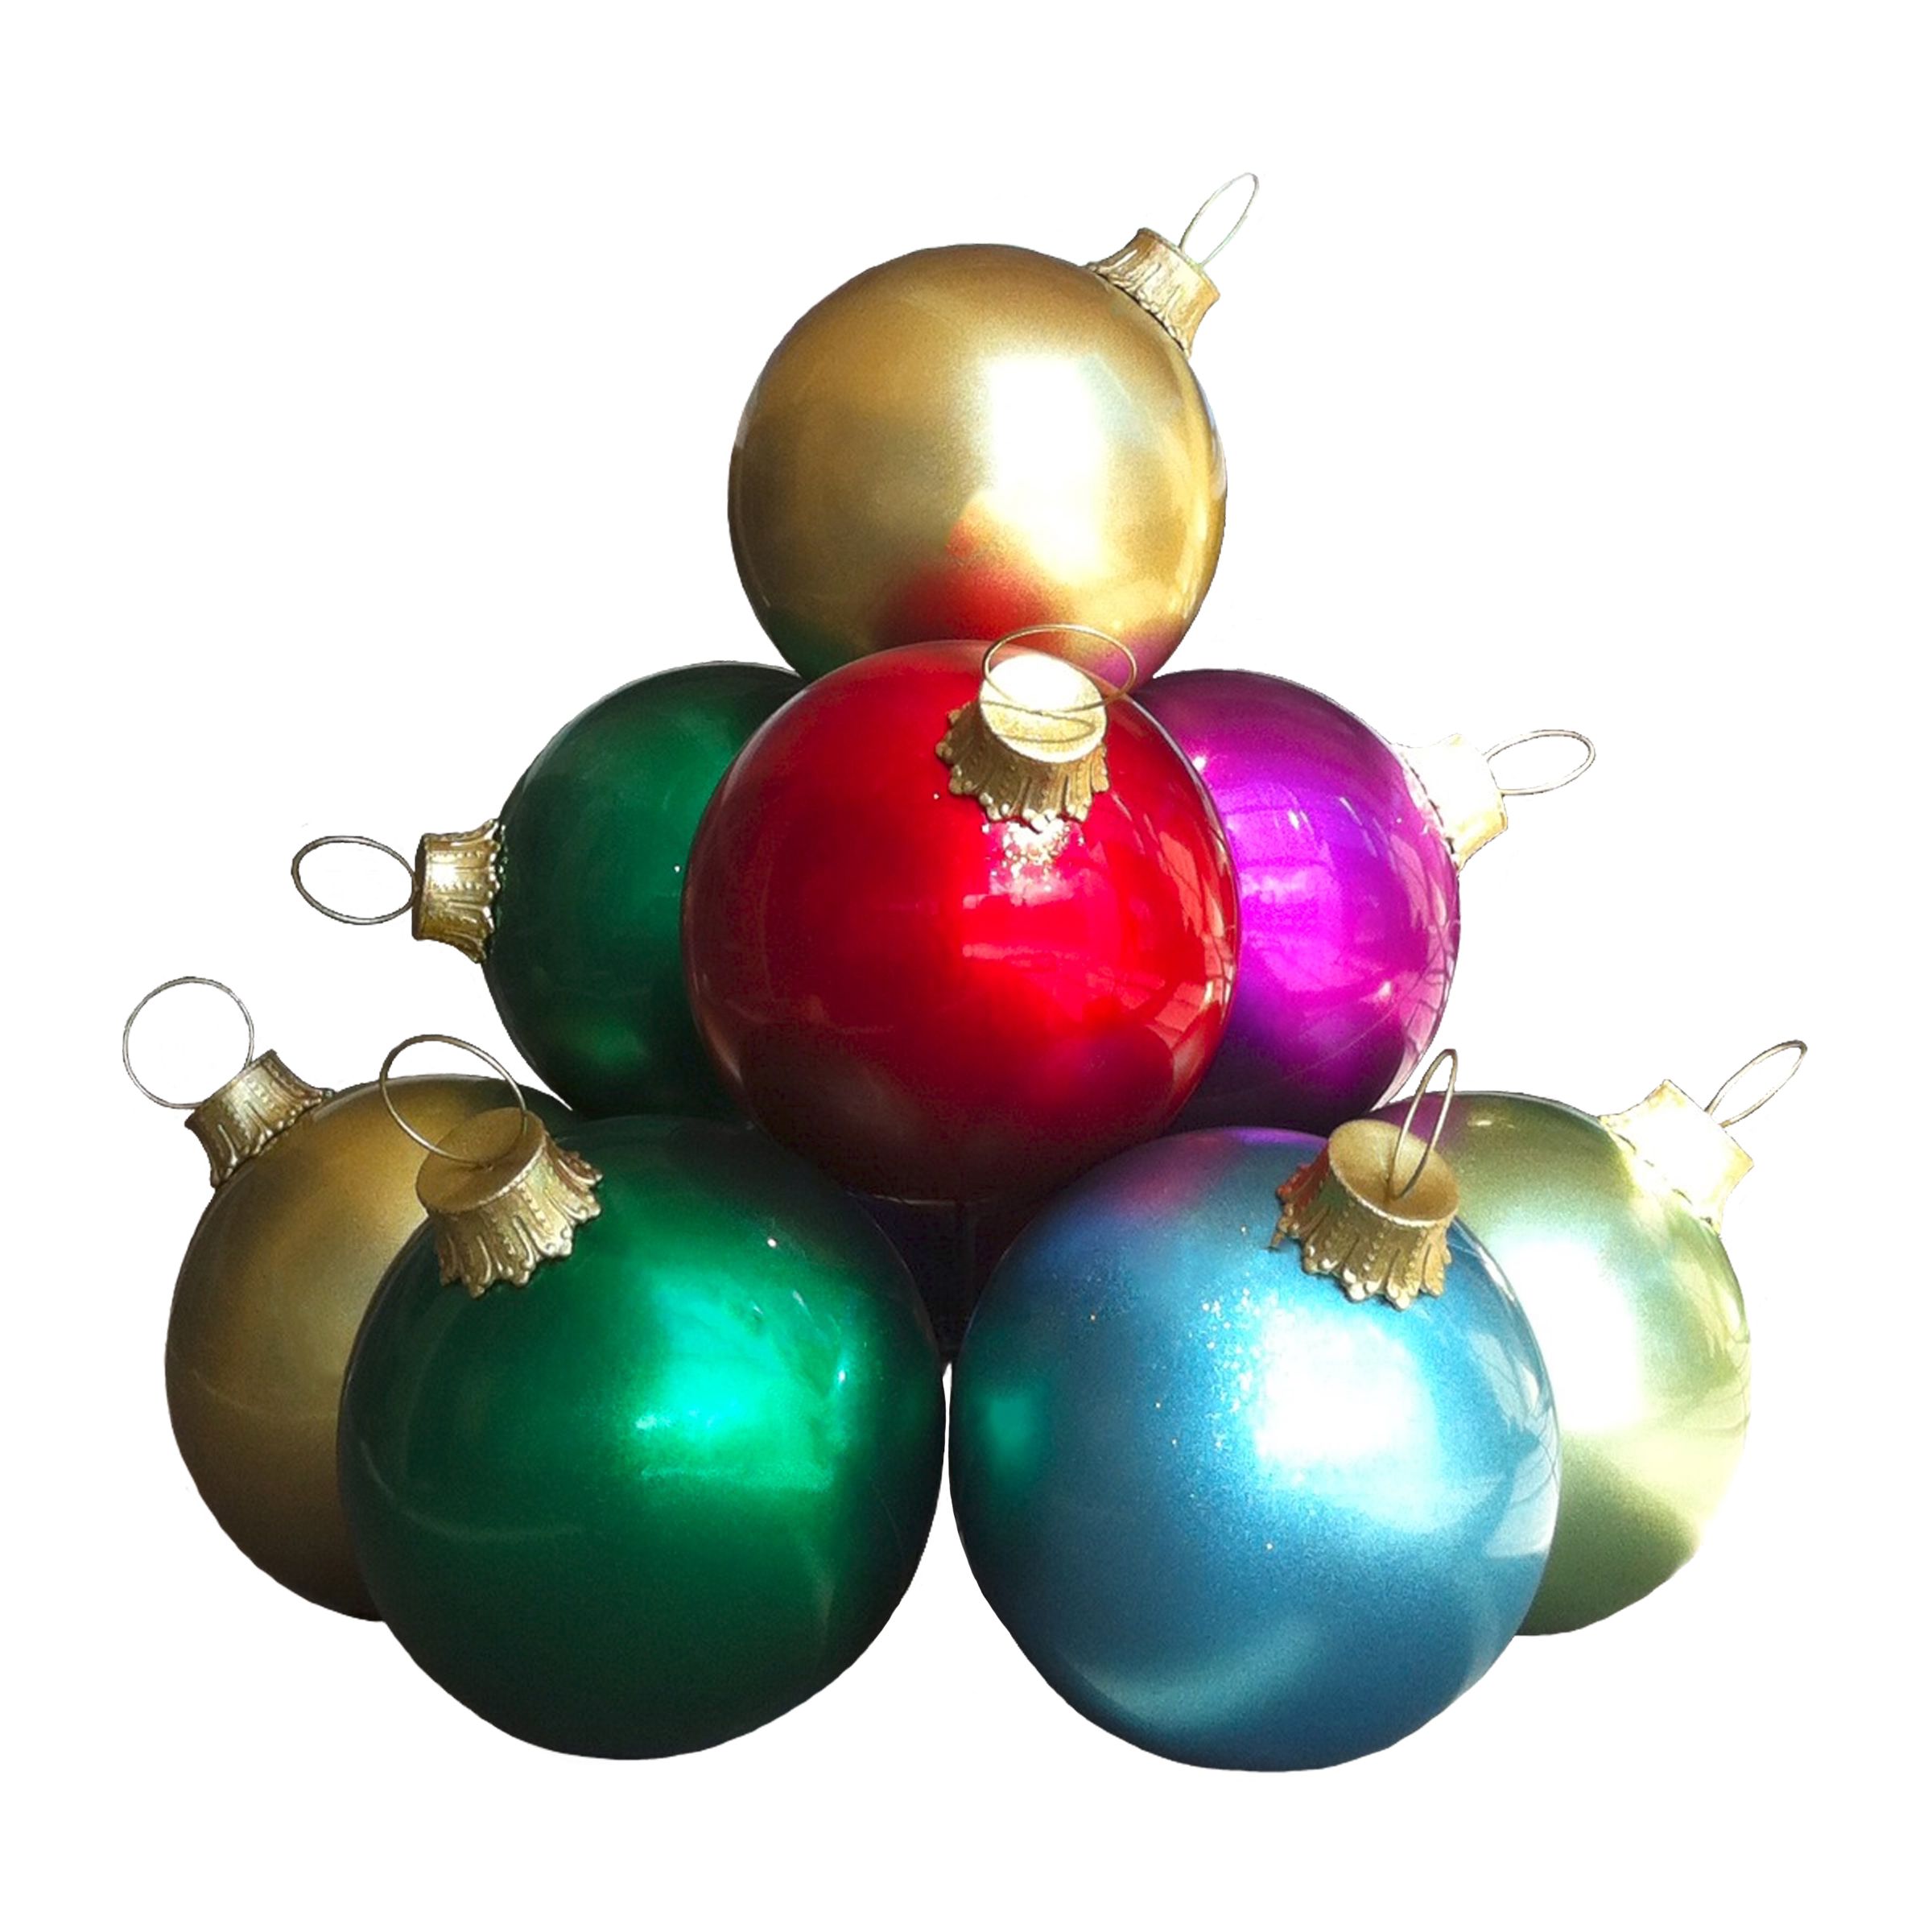 Oversized multi-color ornament stack, set of 10